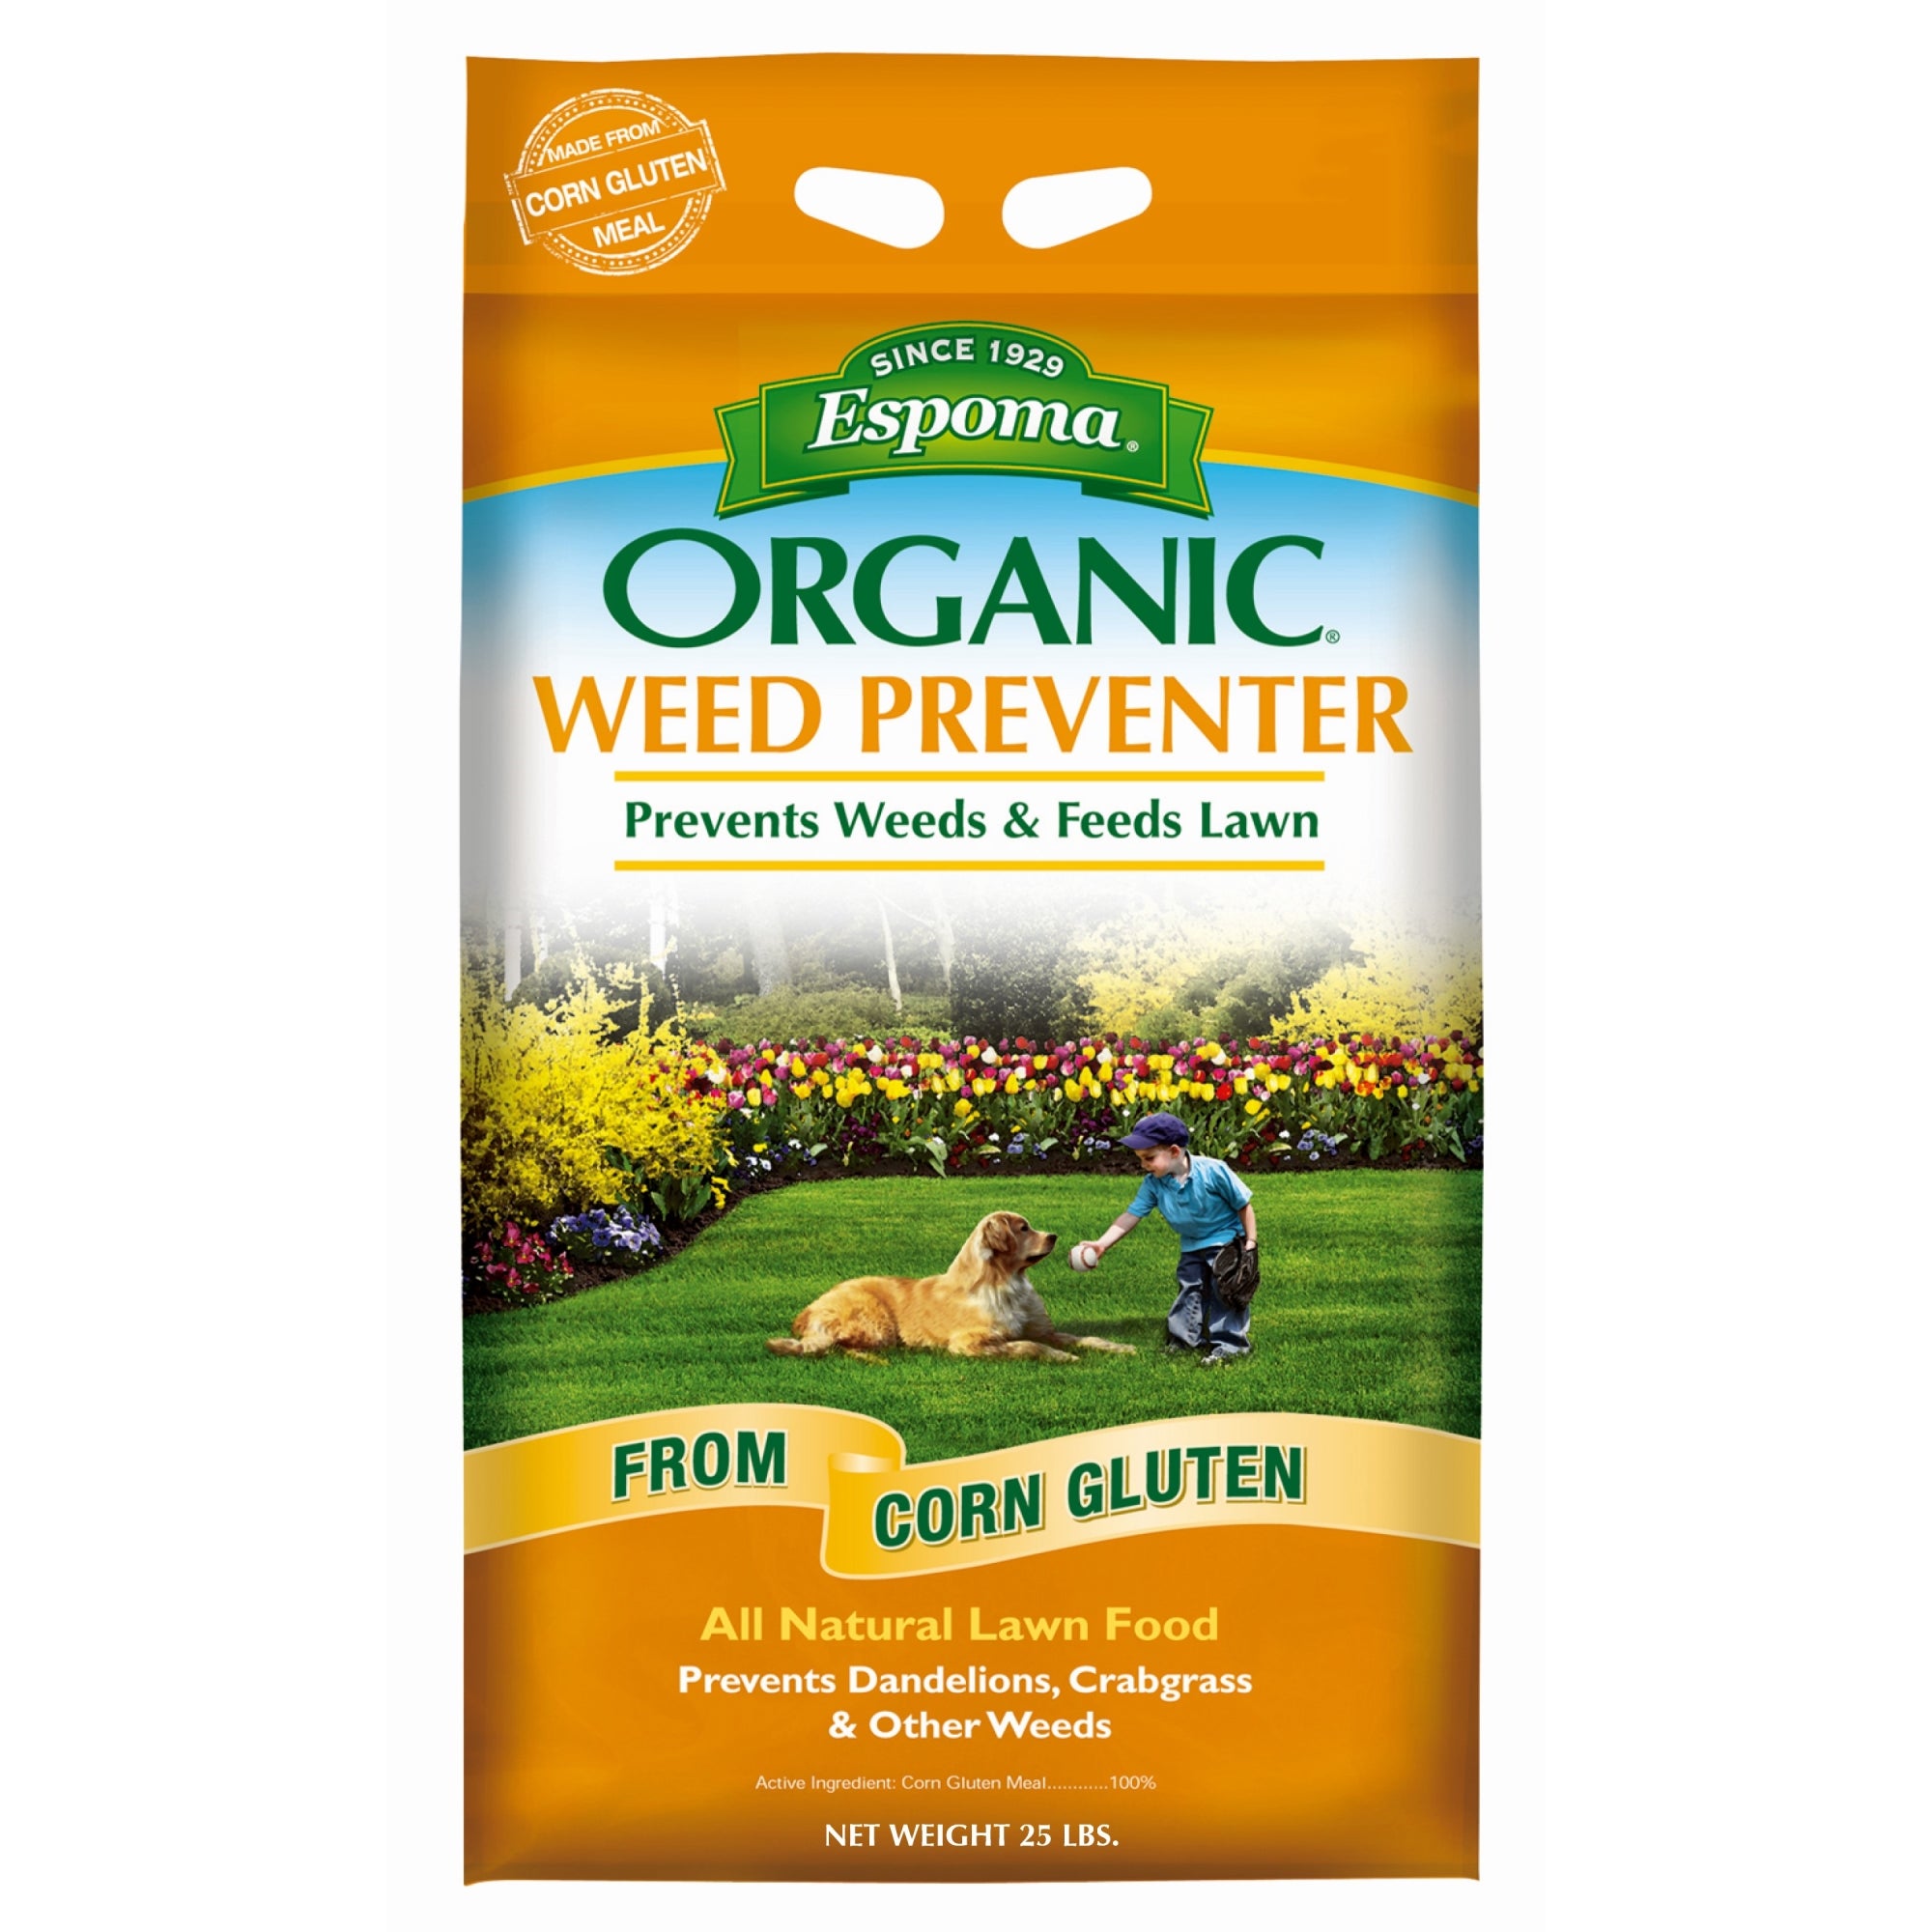 Espoma Organic 9-0-0 All-Natural Weed Preventer, Prevents Weeds & Feeds Lawns, Made from Corn Gluten, 25 lb Bag